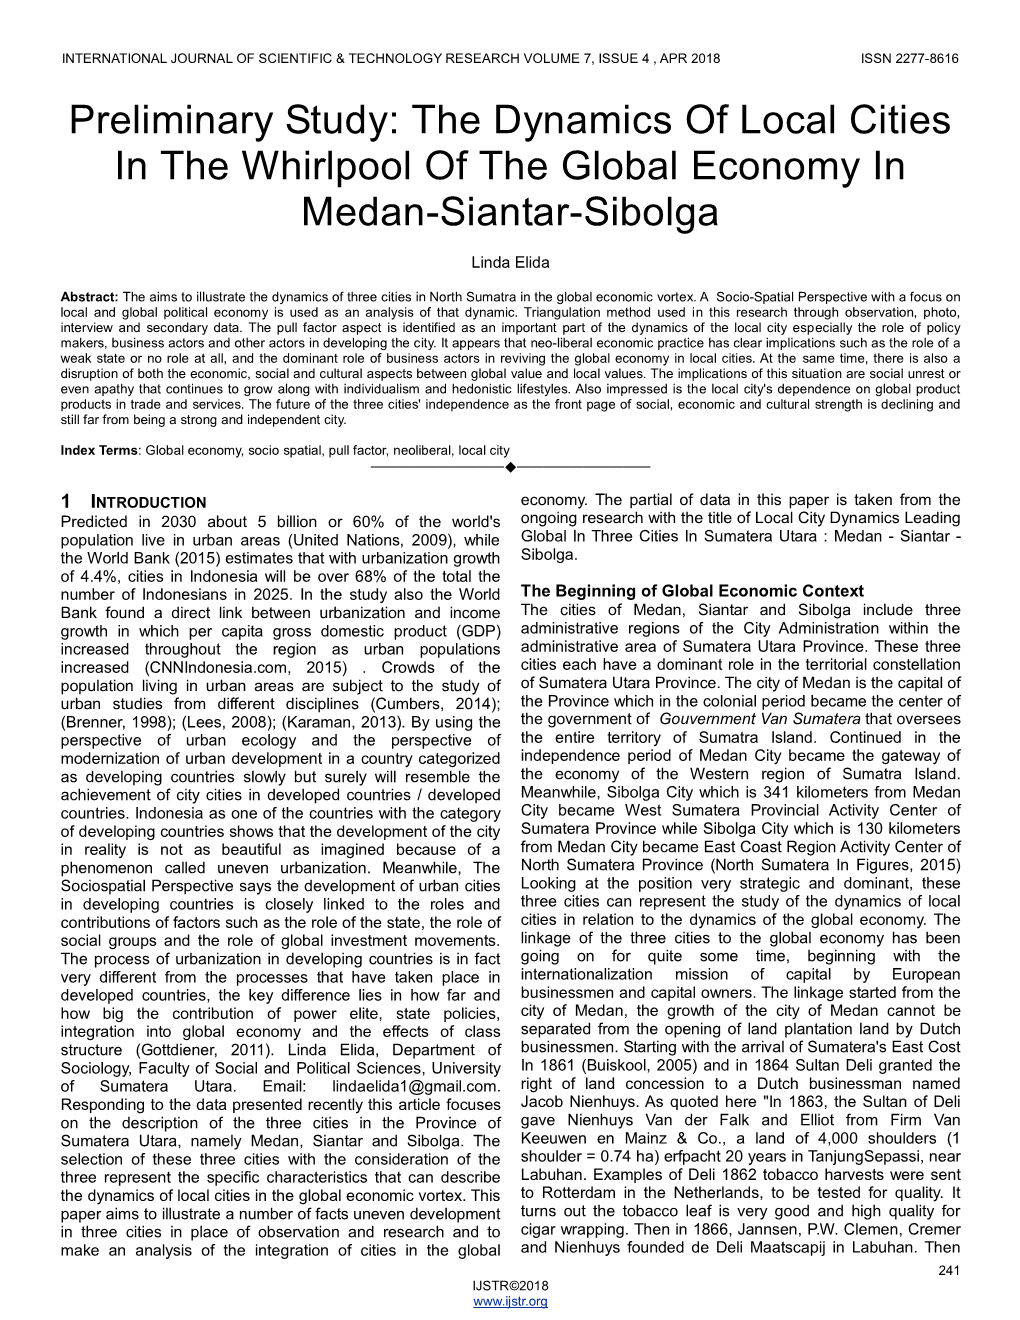 The Dynamics of Local Cities in the Whirlpool of the Global Economy in Medan-Siantar-Sibolga